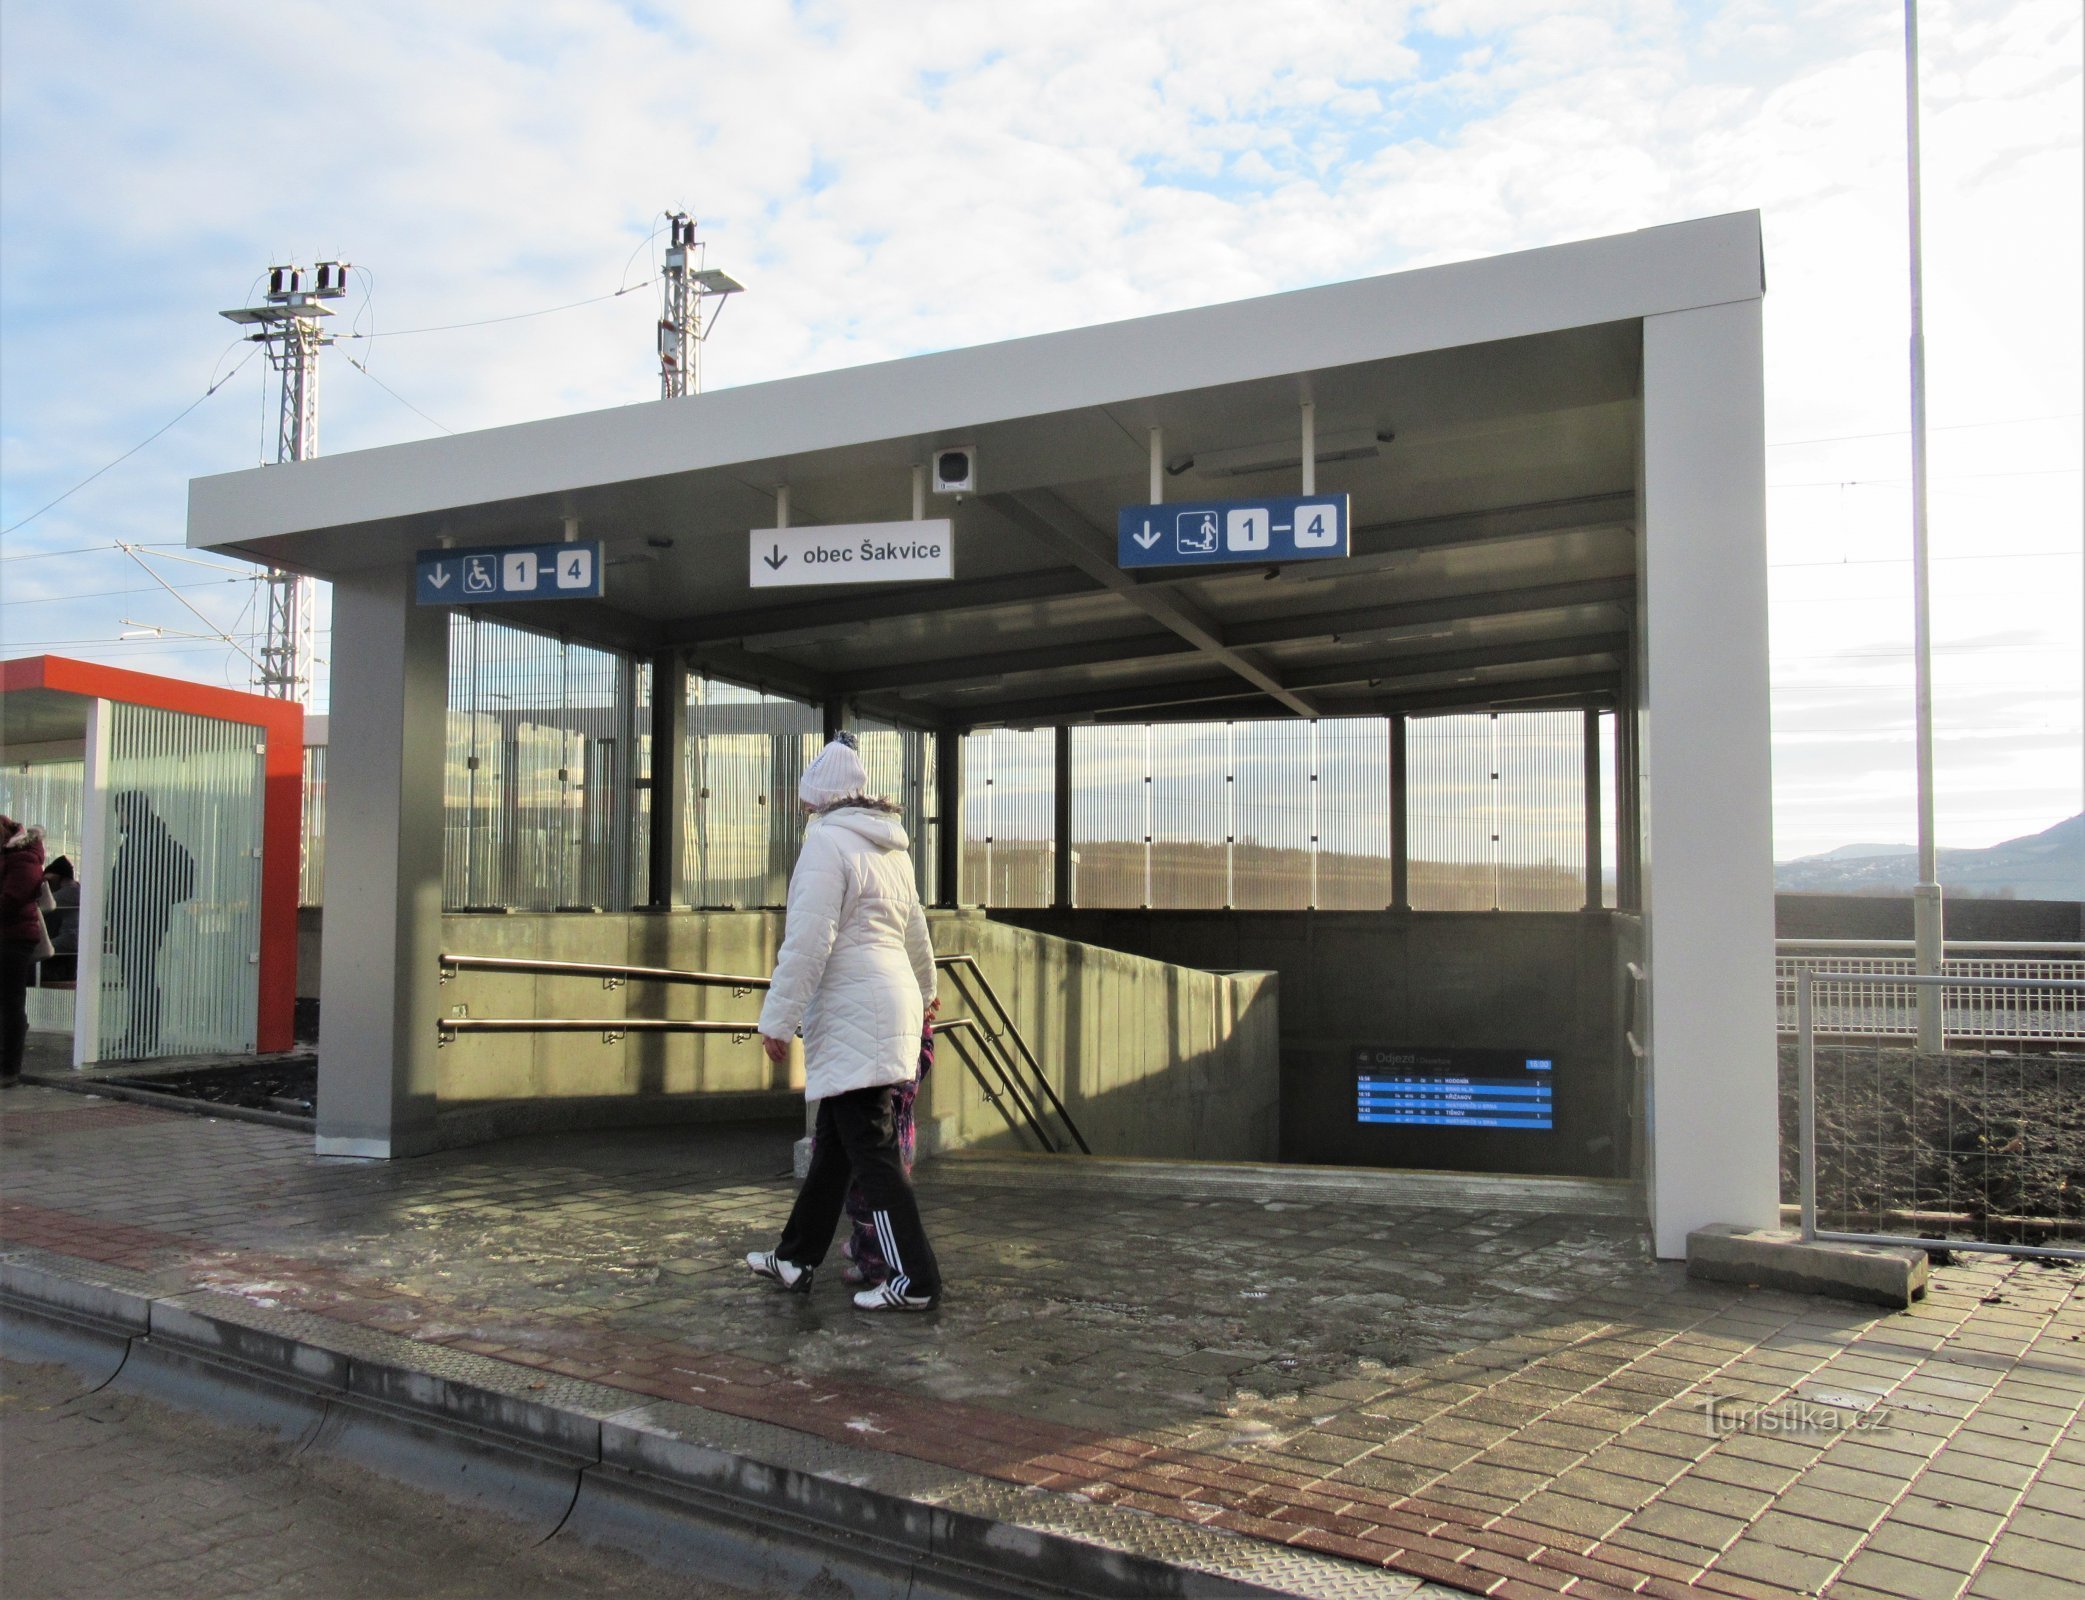 The main entrance to the underpass and access to the platforms